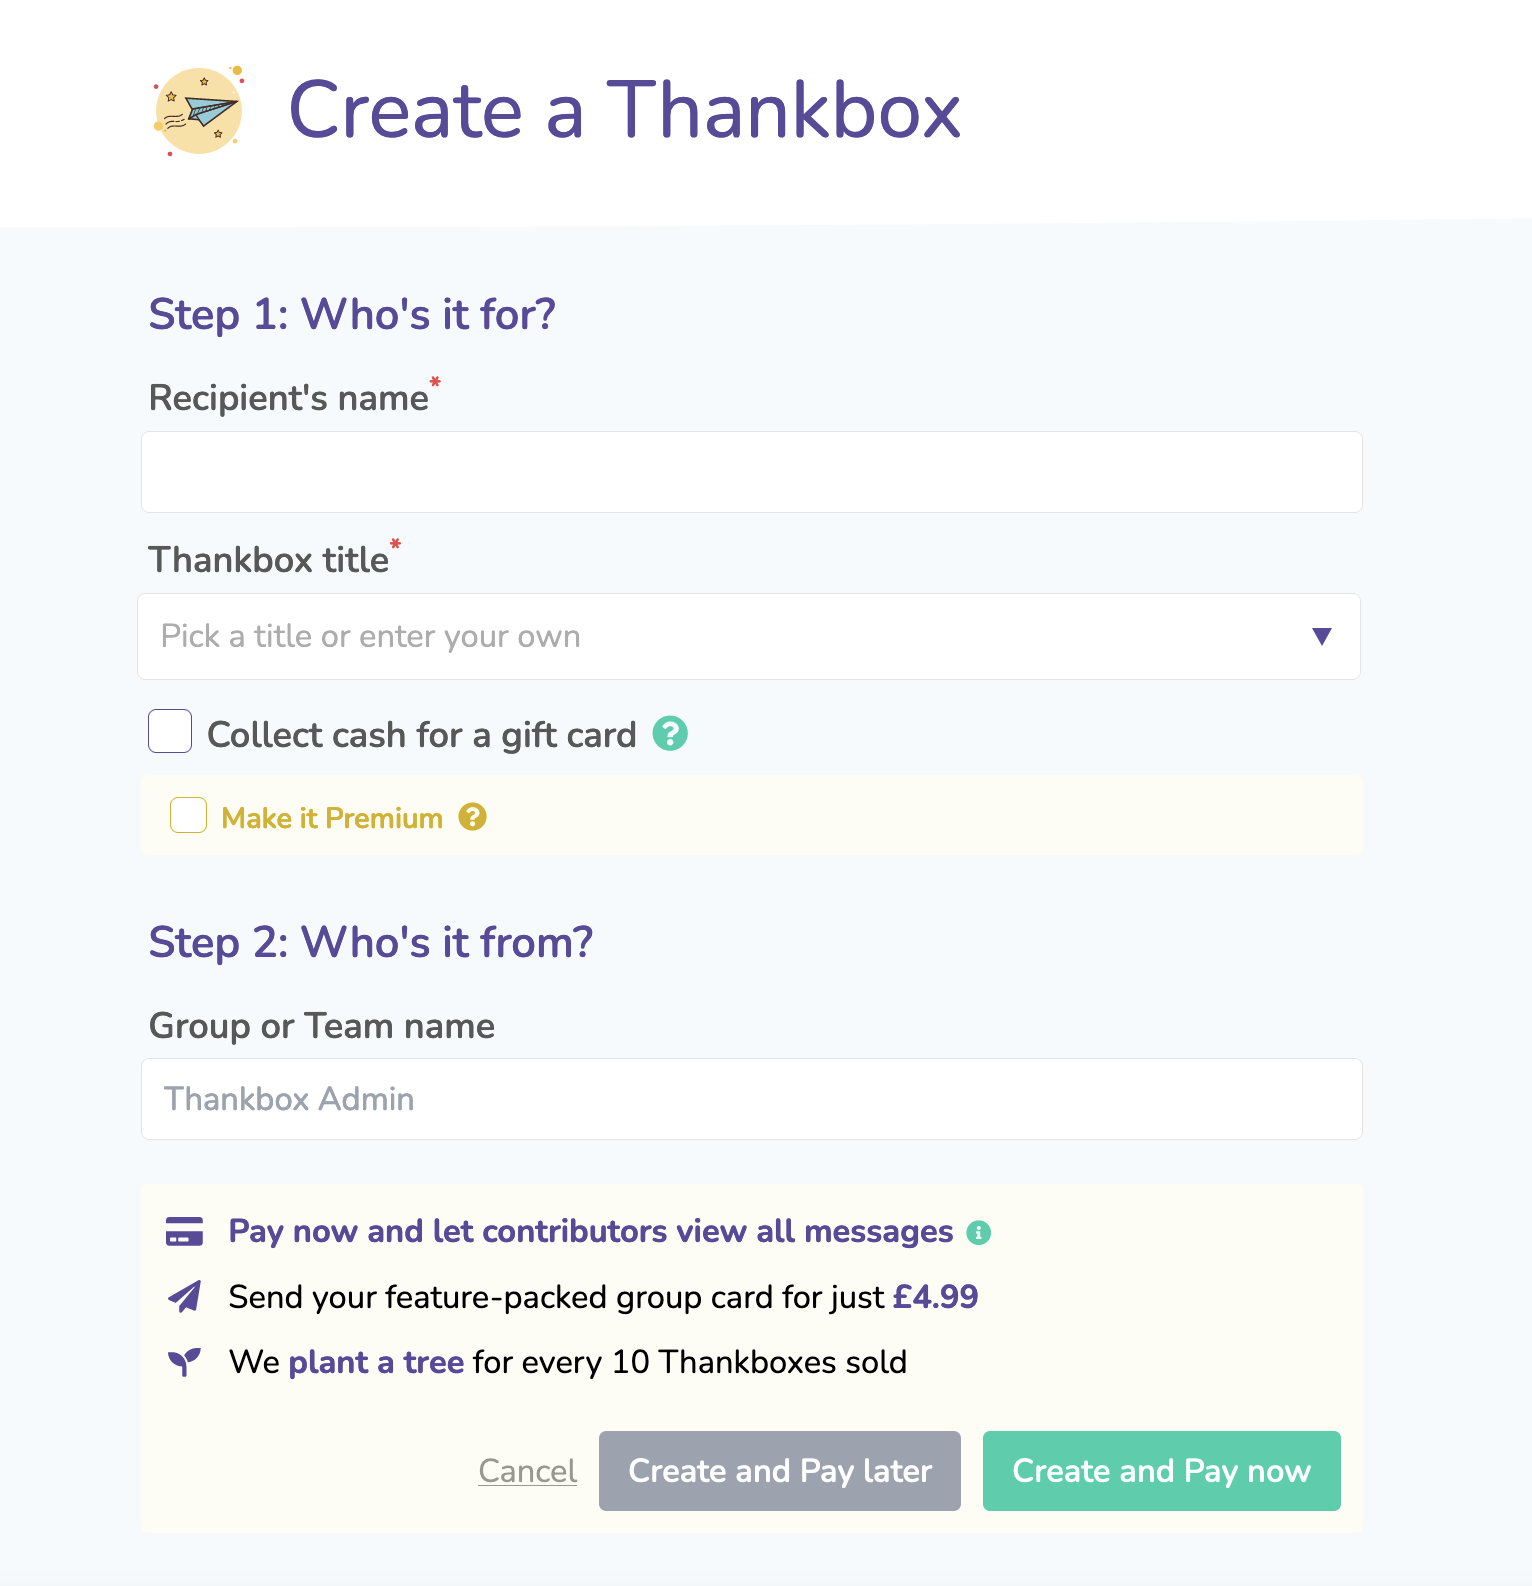 Create your Thankbox card in just 1 minute. Start collecting messages with just a link!